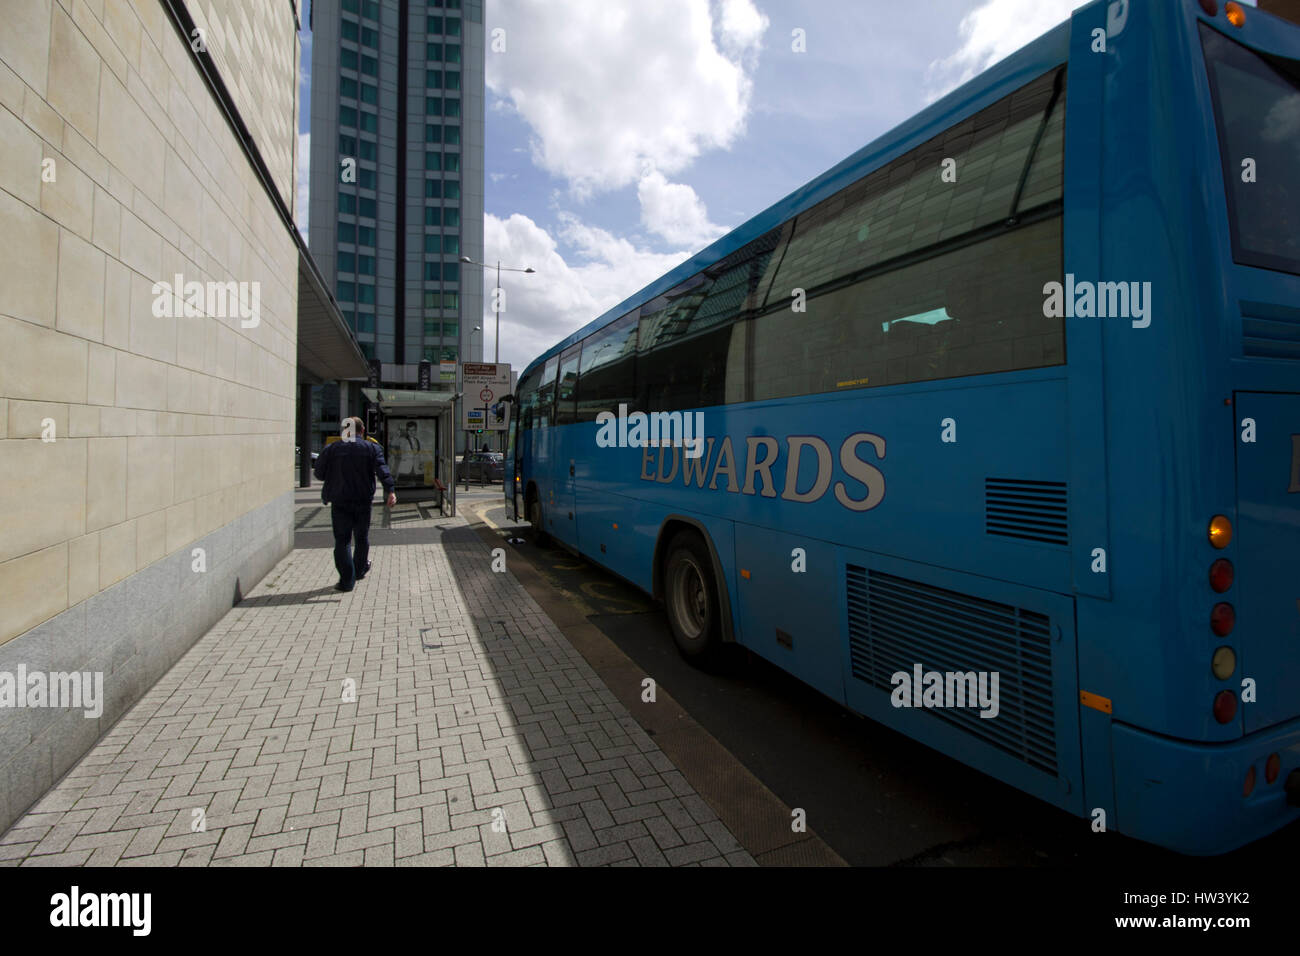 CARDIFF, UNITED KINGDOM. Edwards bus parked outside a bus stop with no queue. Stock Photo